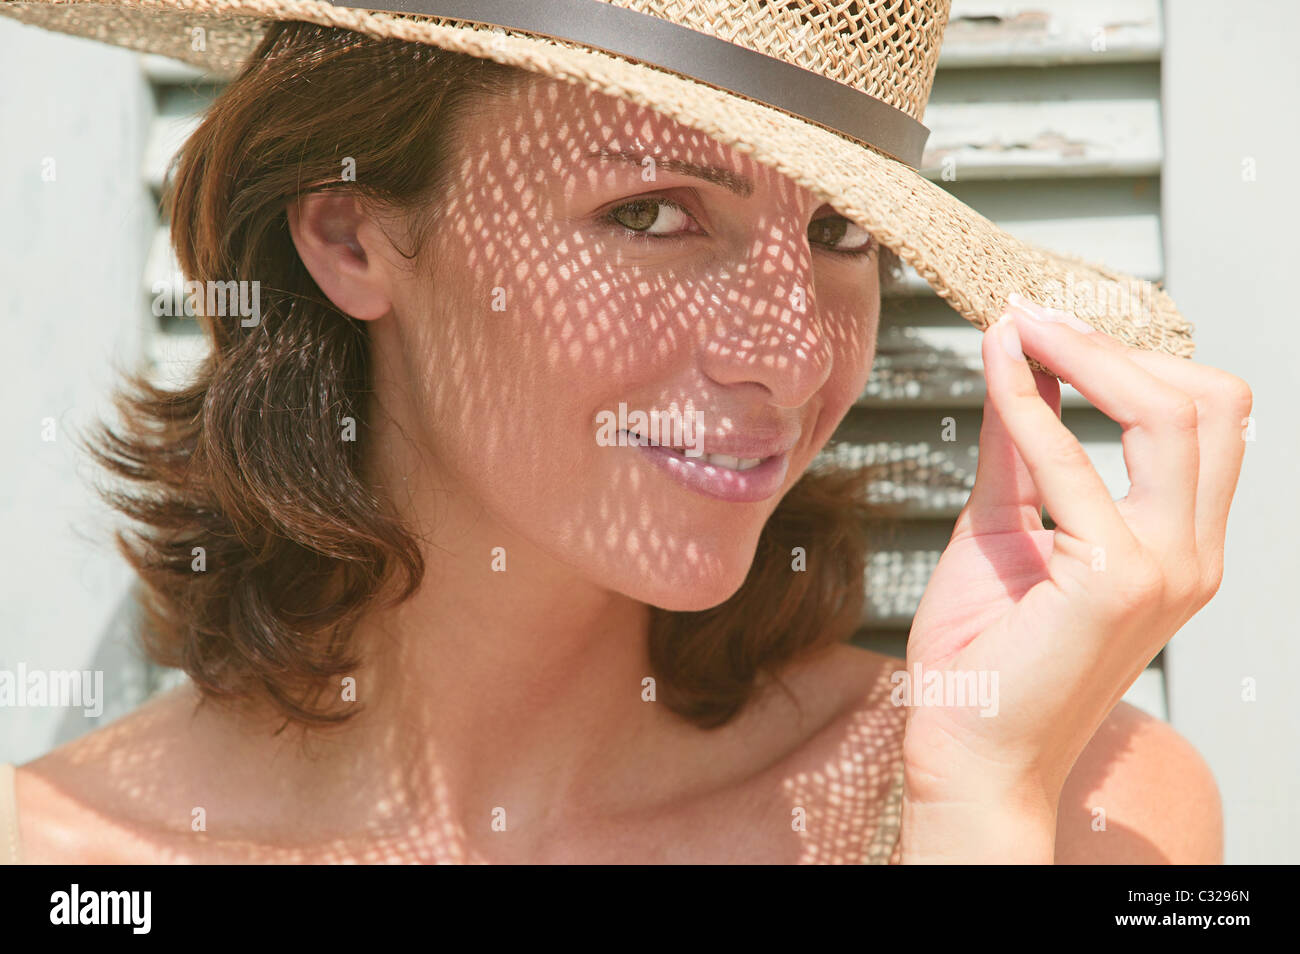 Woman wearing a sun hat with shadows on face Stock Photo